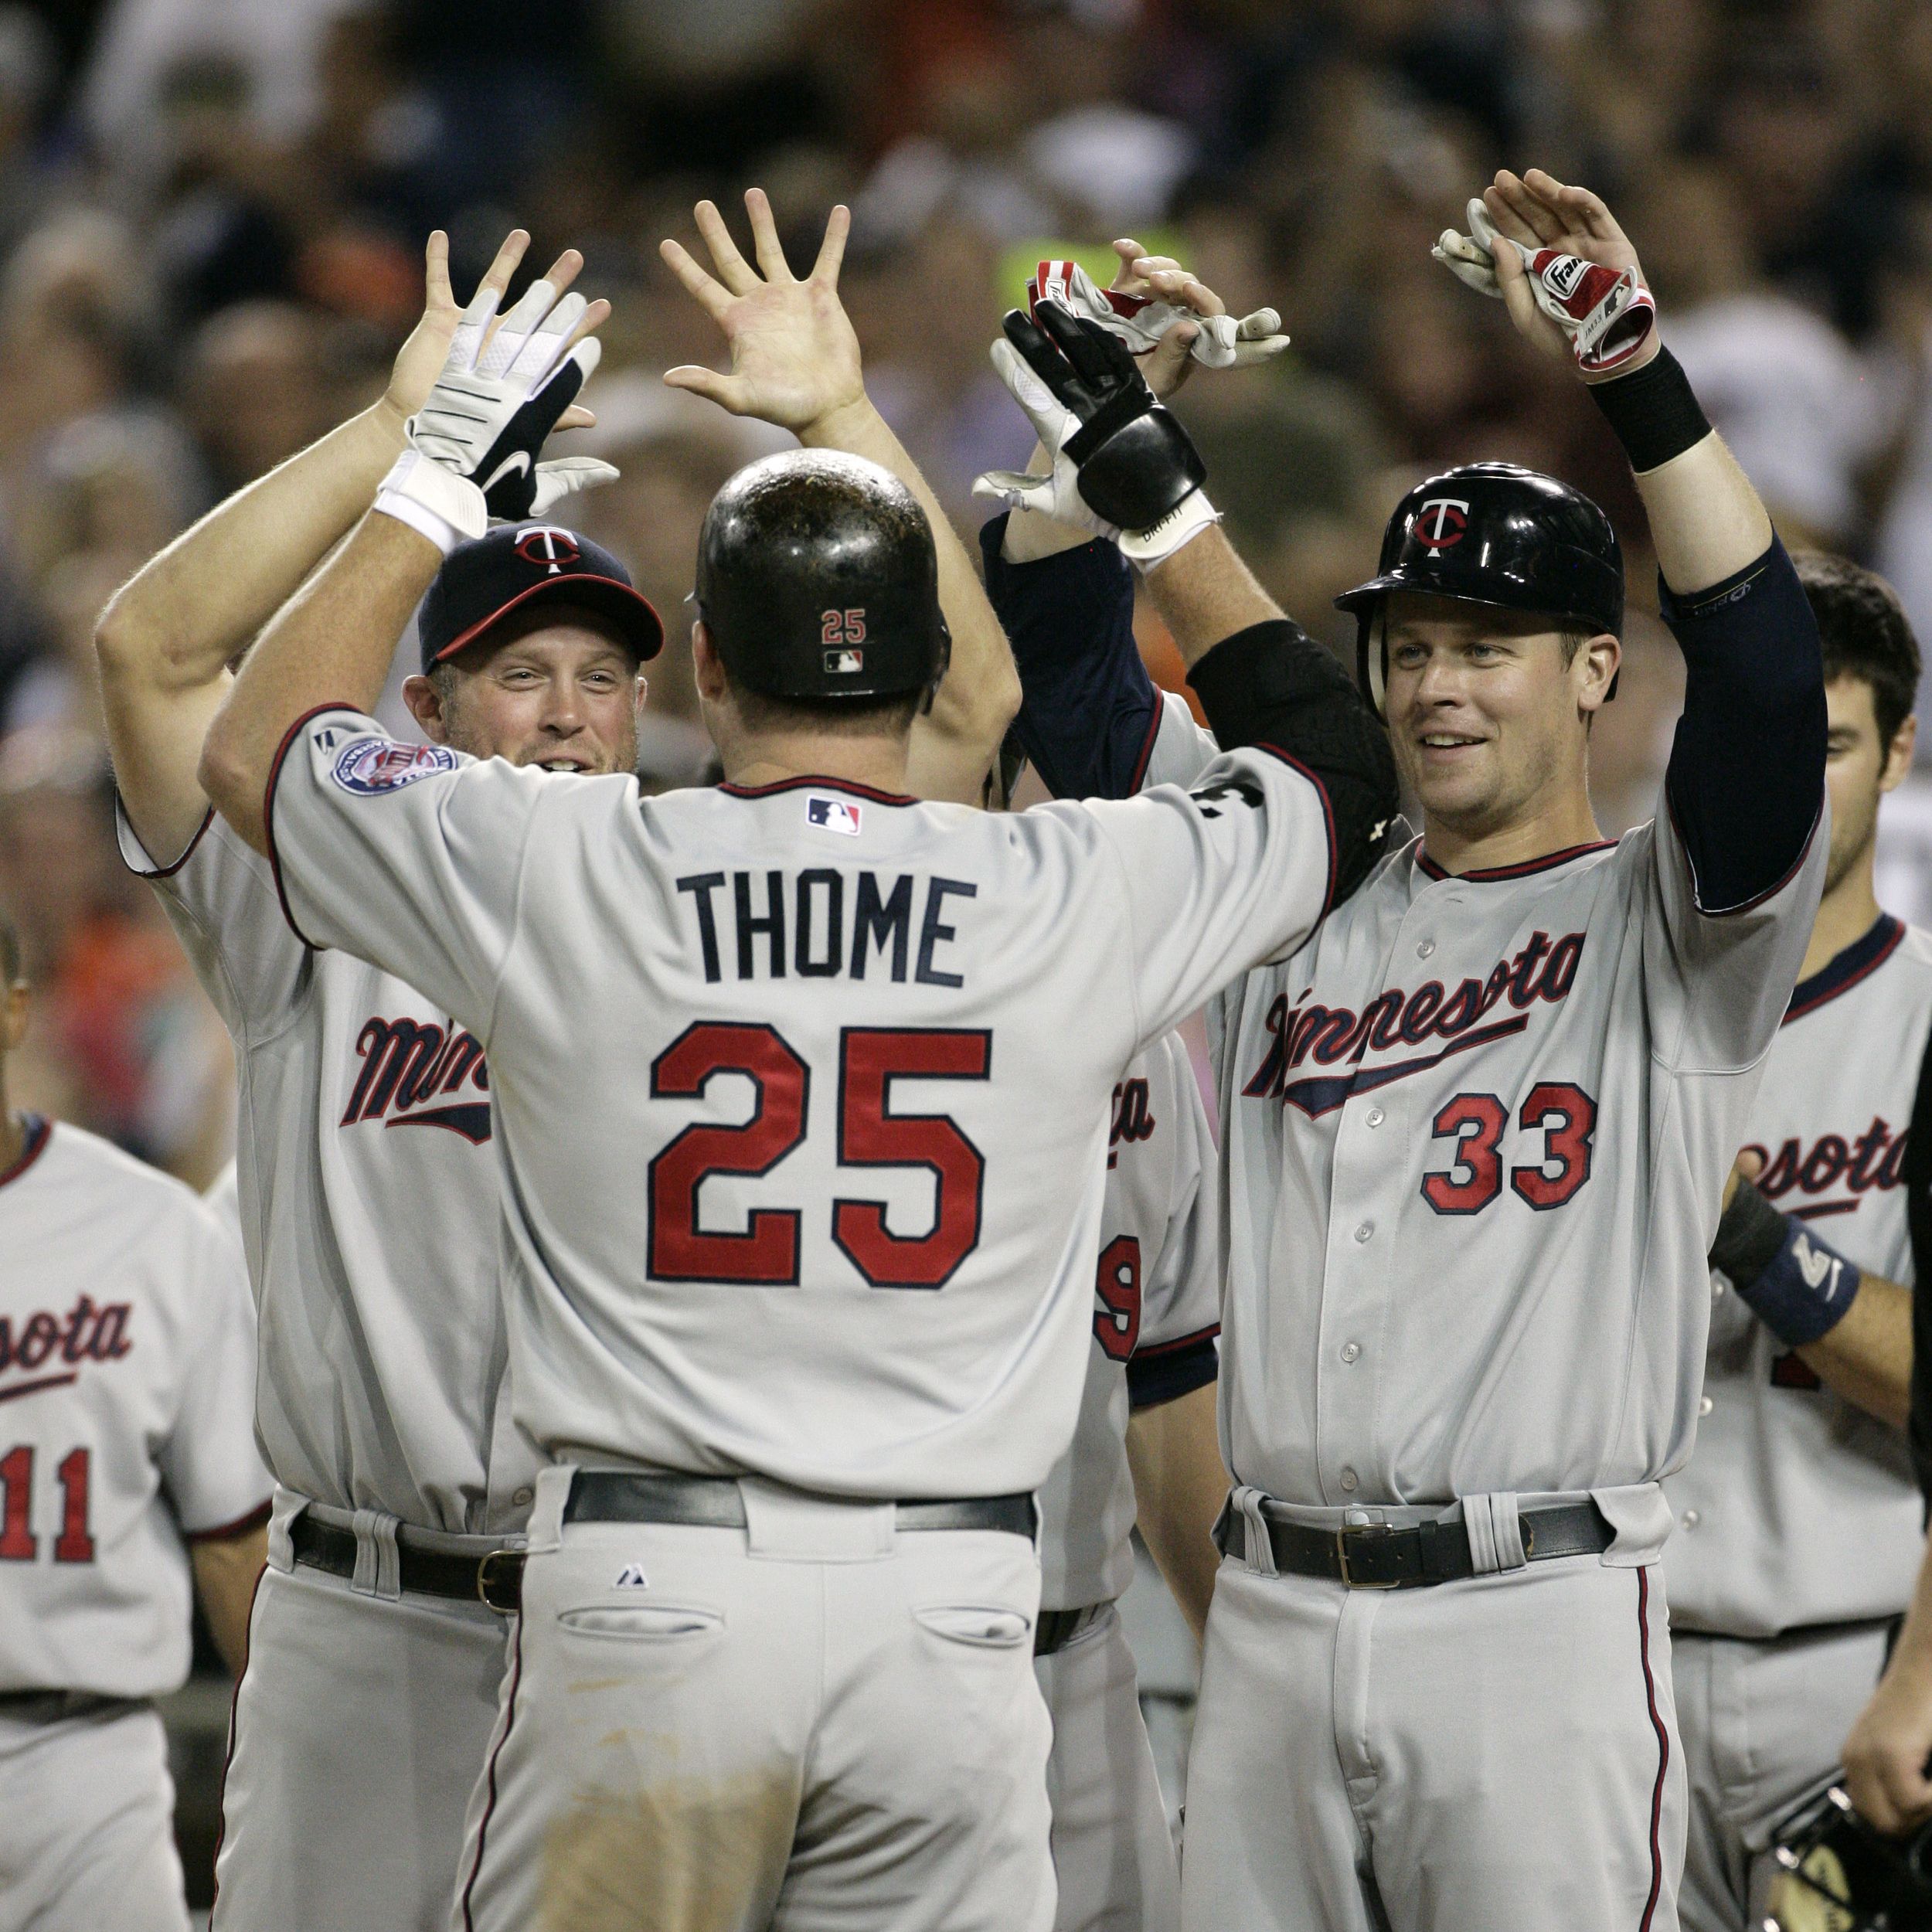 Road to 600 home runs a memorable one for Jim Thome - ESPN